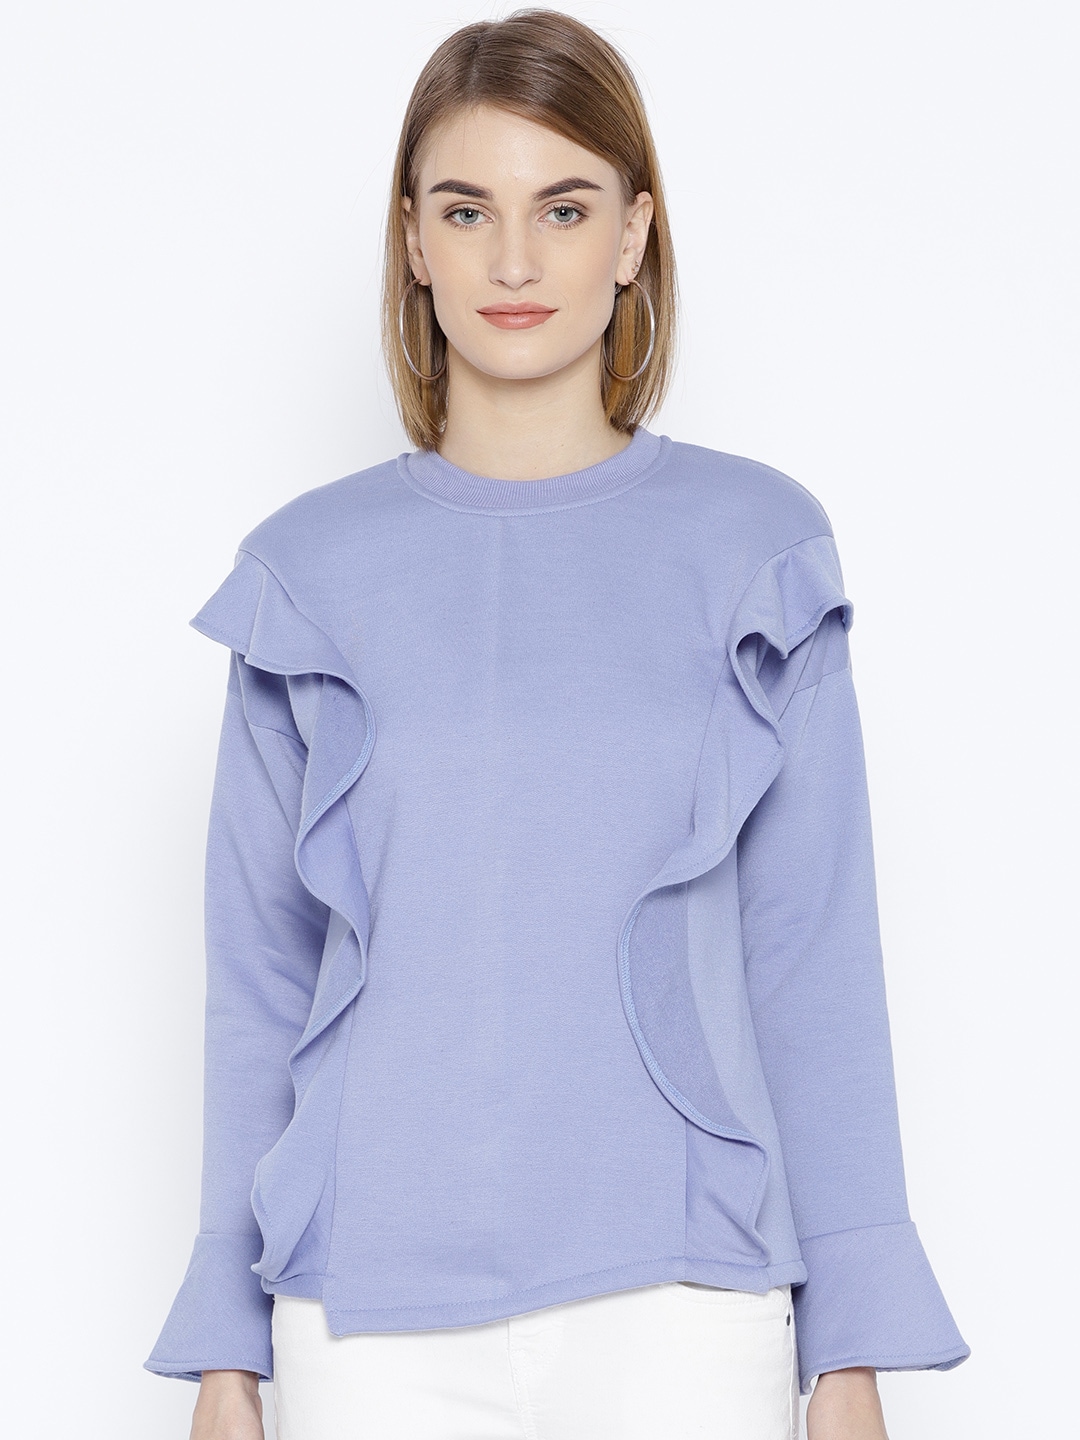 Belle Fille Women Lavender Solid Sweatshirt with Ruffle Detail Price in India